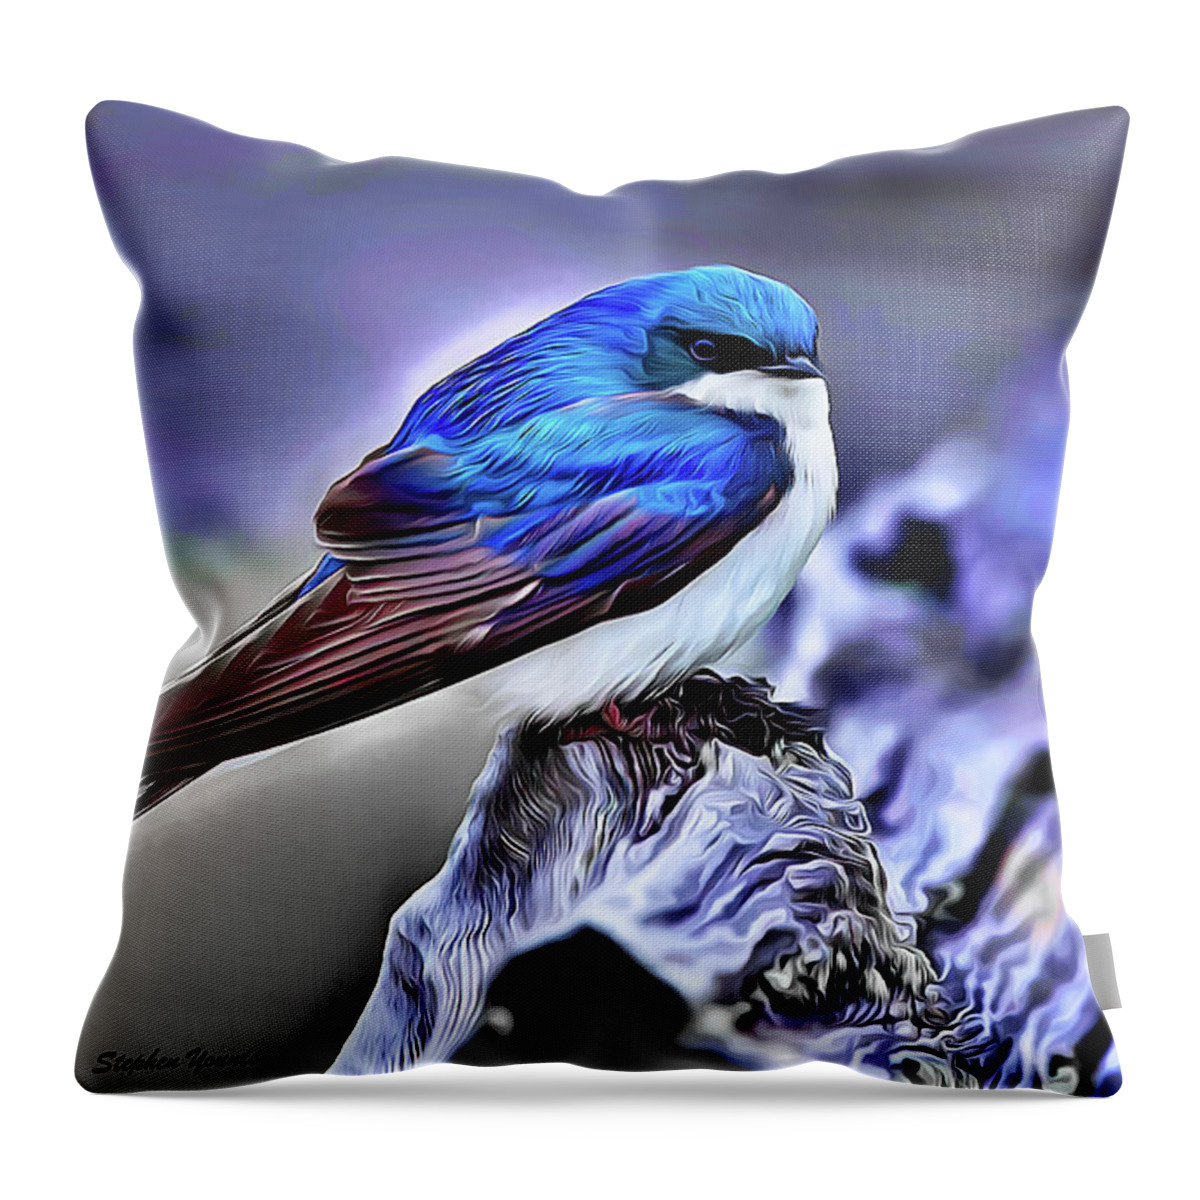 Tree Swallow Throw Pillow featuring the digital art Tree Swallow by Stephen Younts